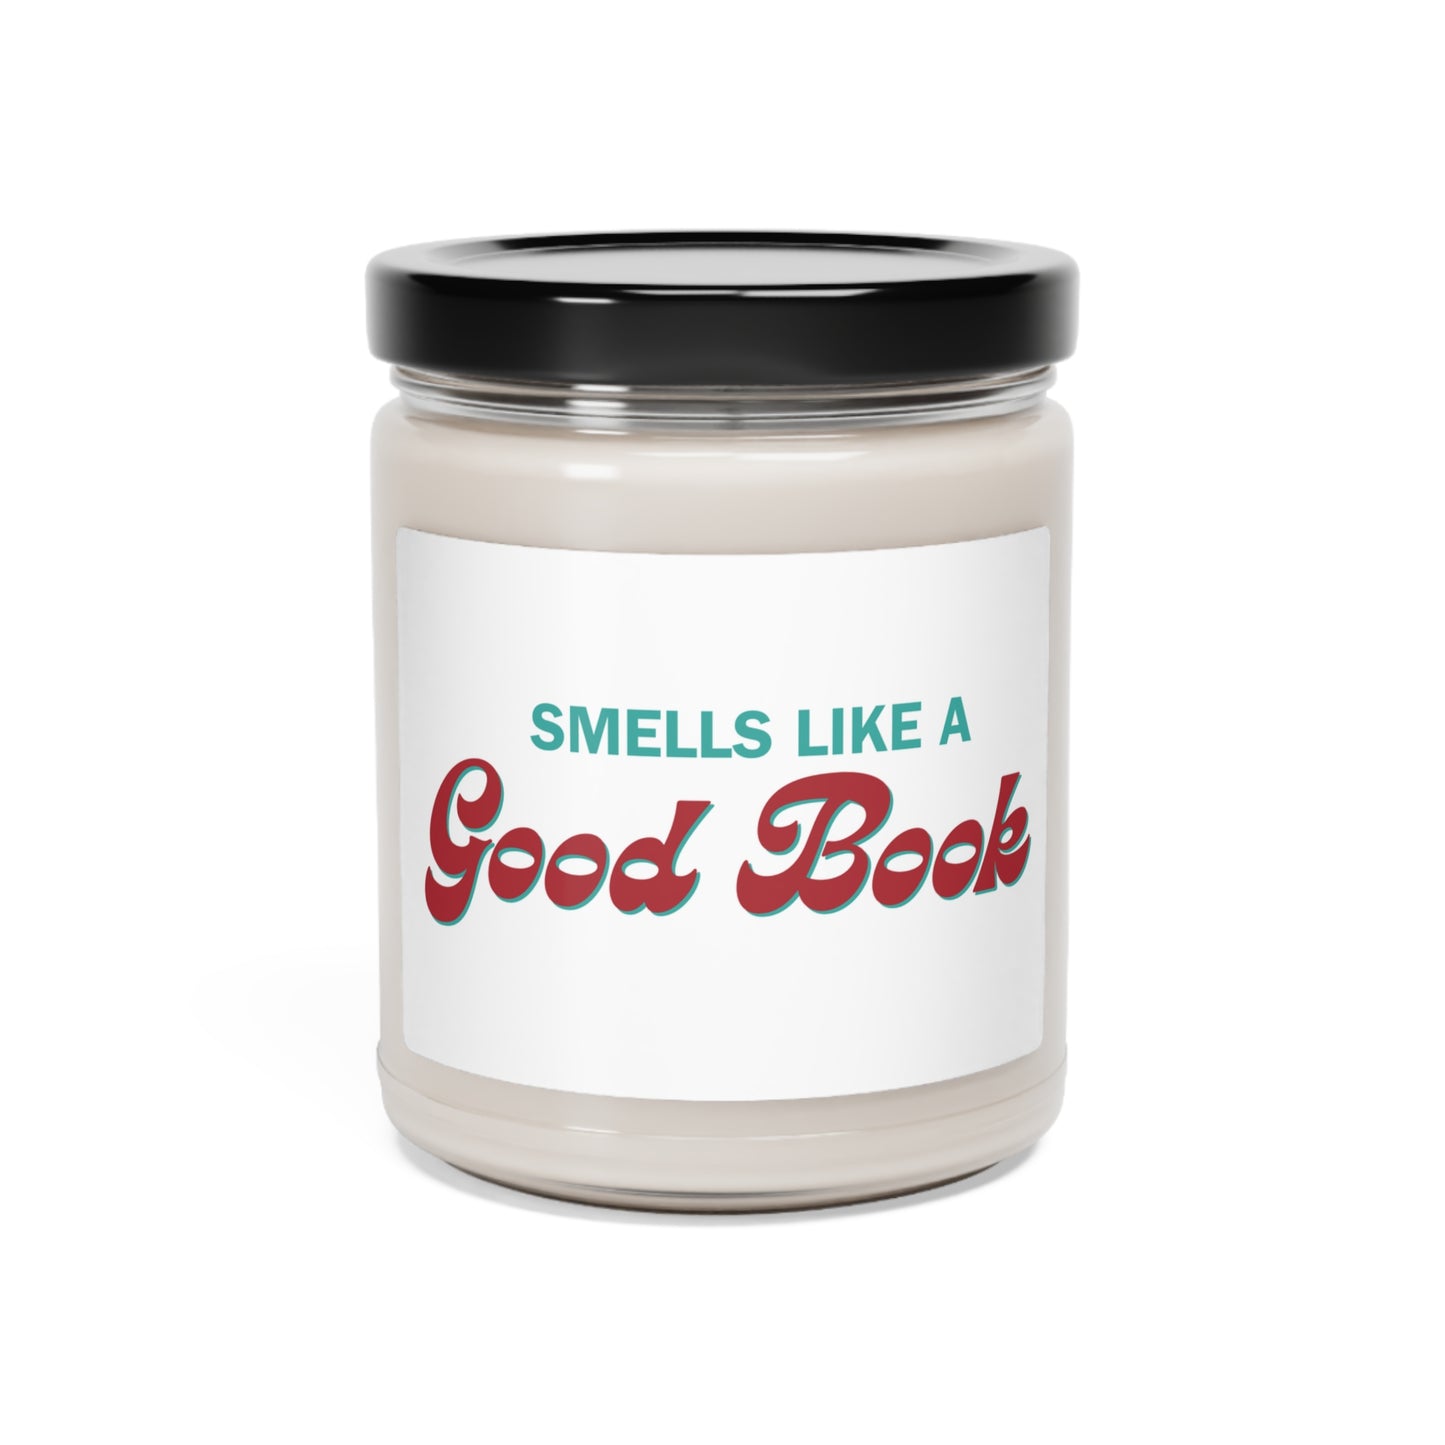 Smells Like a Good Book Scented Soy Candle, 9oz